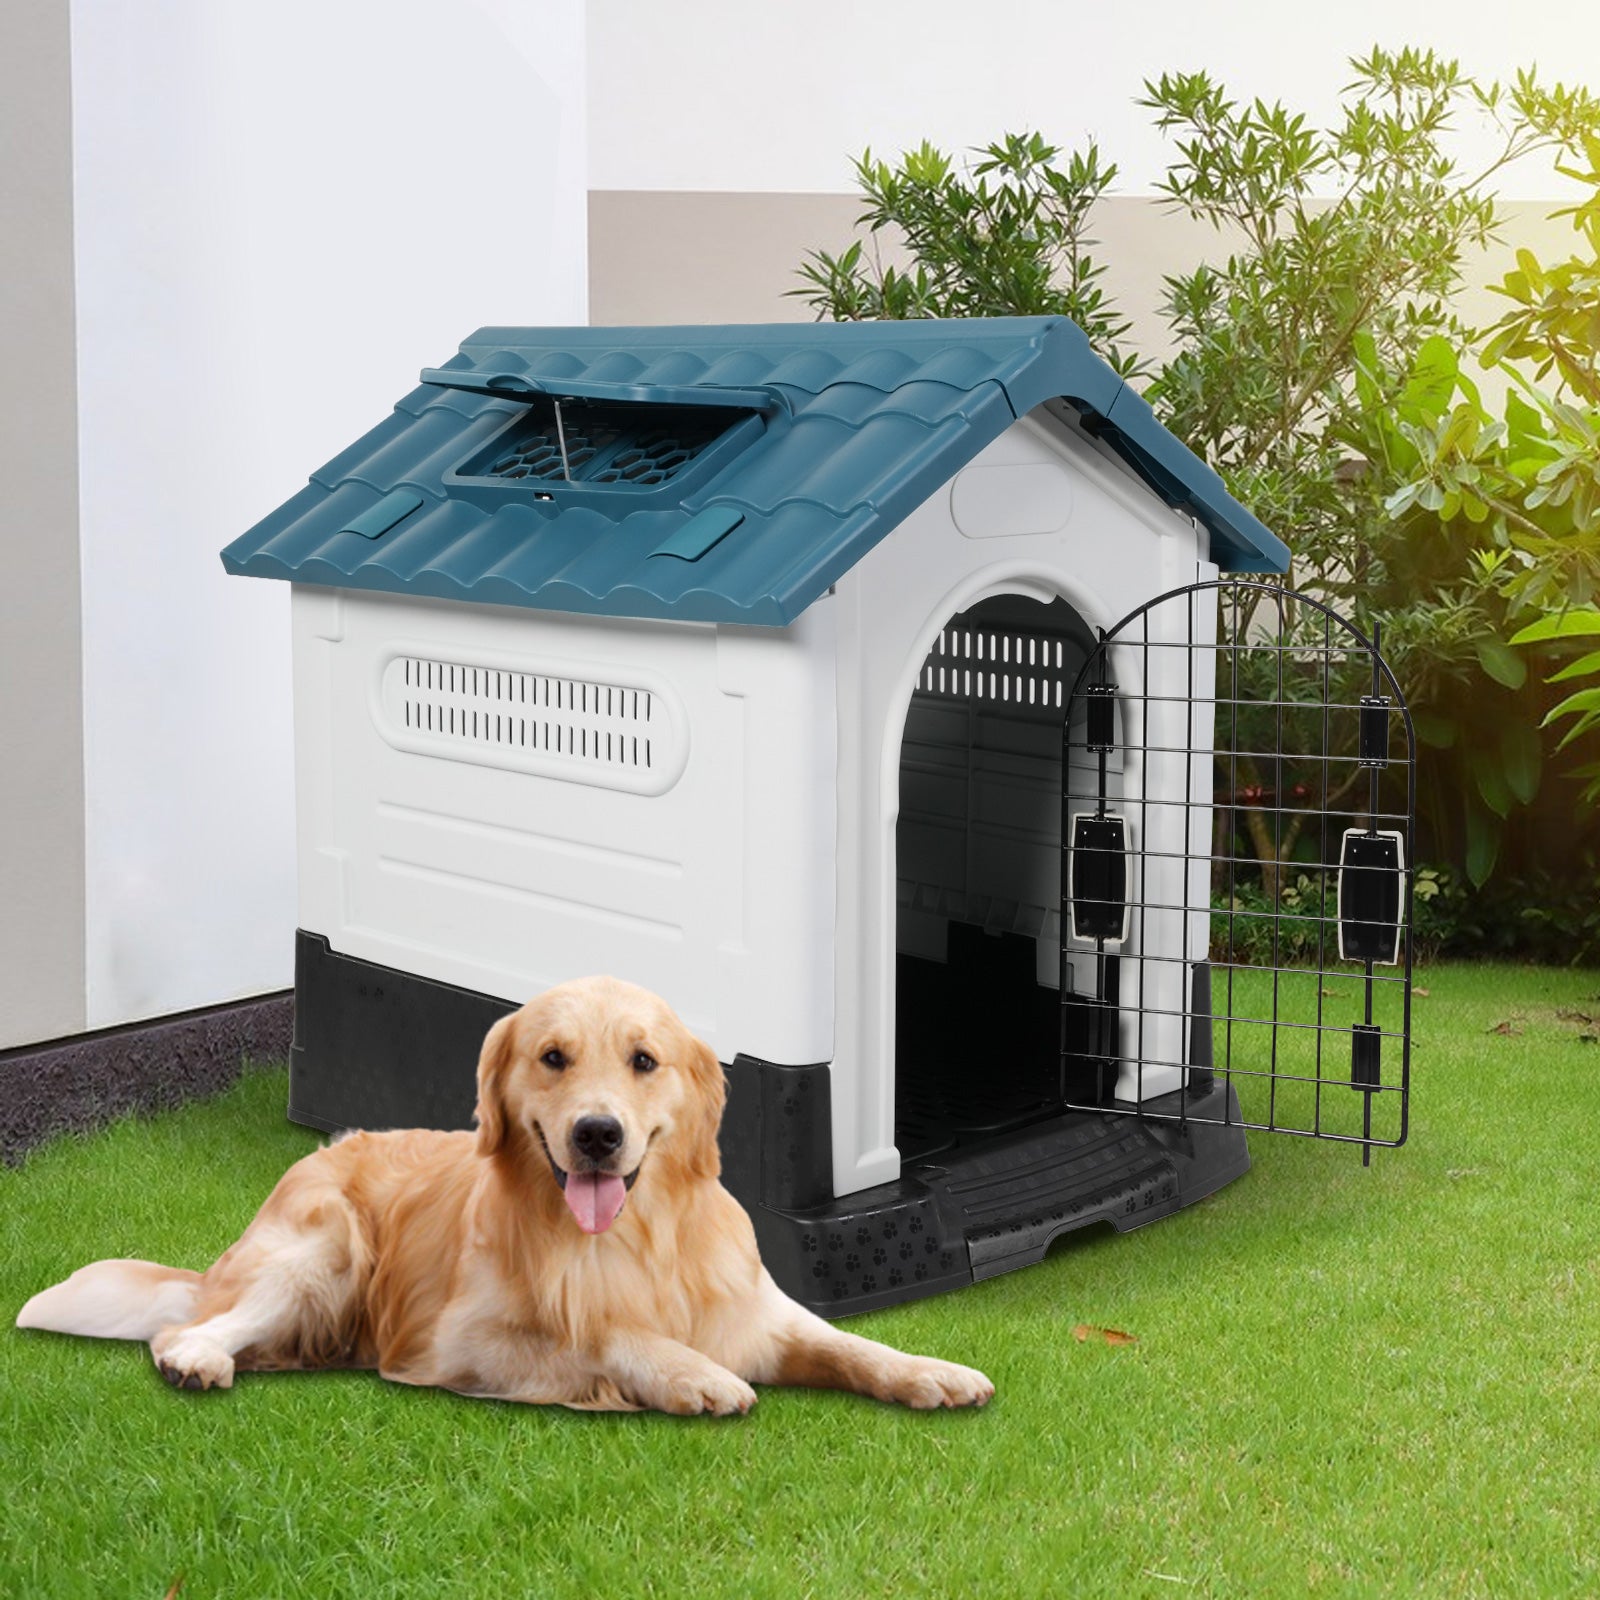 Outdoor Medium Dog House Plastic Waterproof Kennel with Air Vents, 33"L x 27.6"W x 29.9"H, Blue Roof